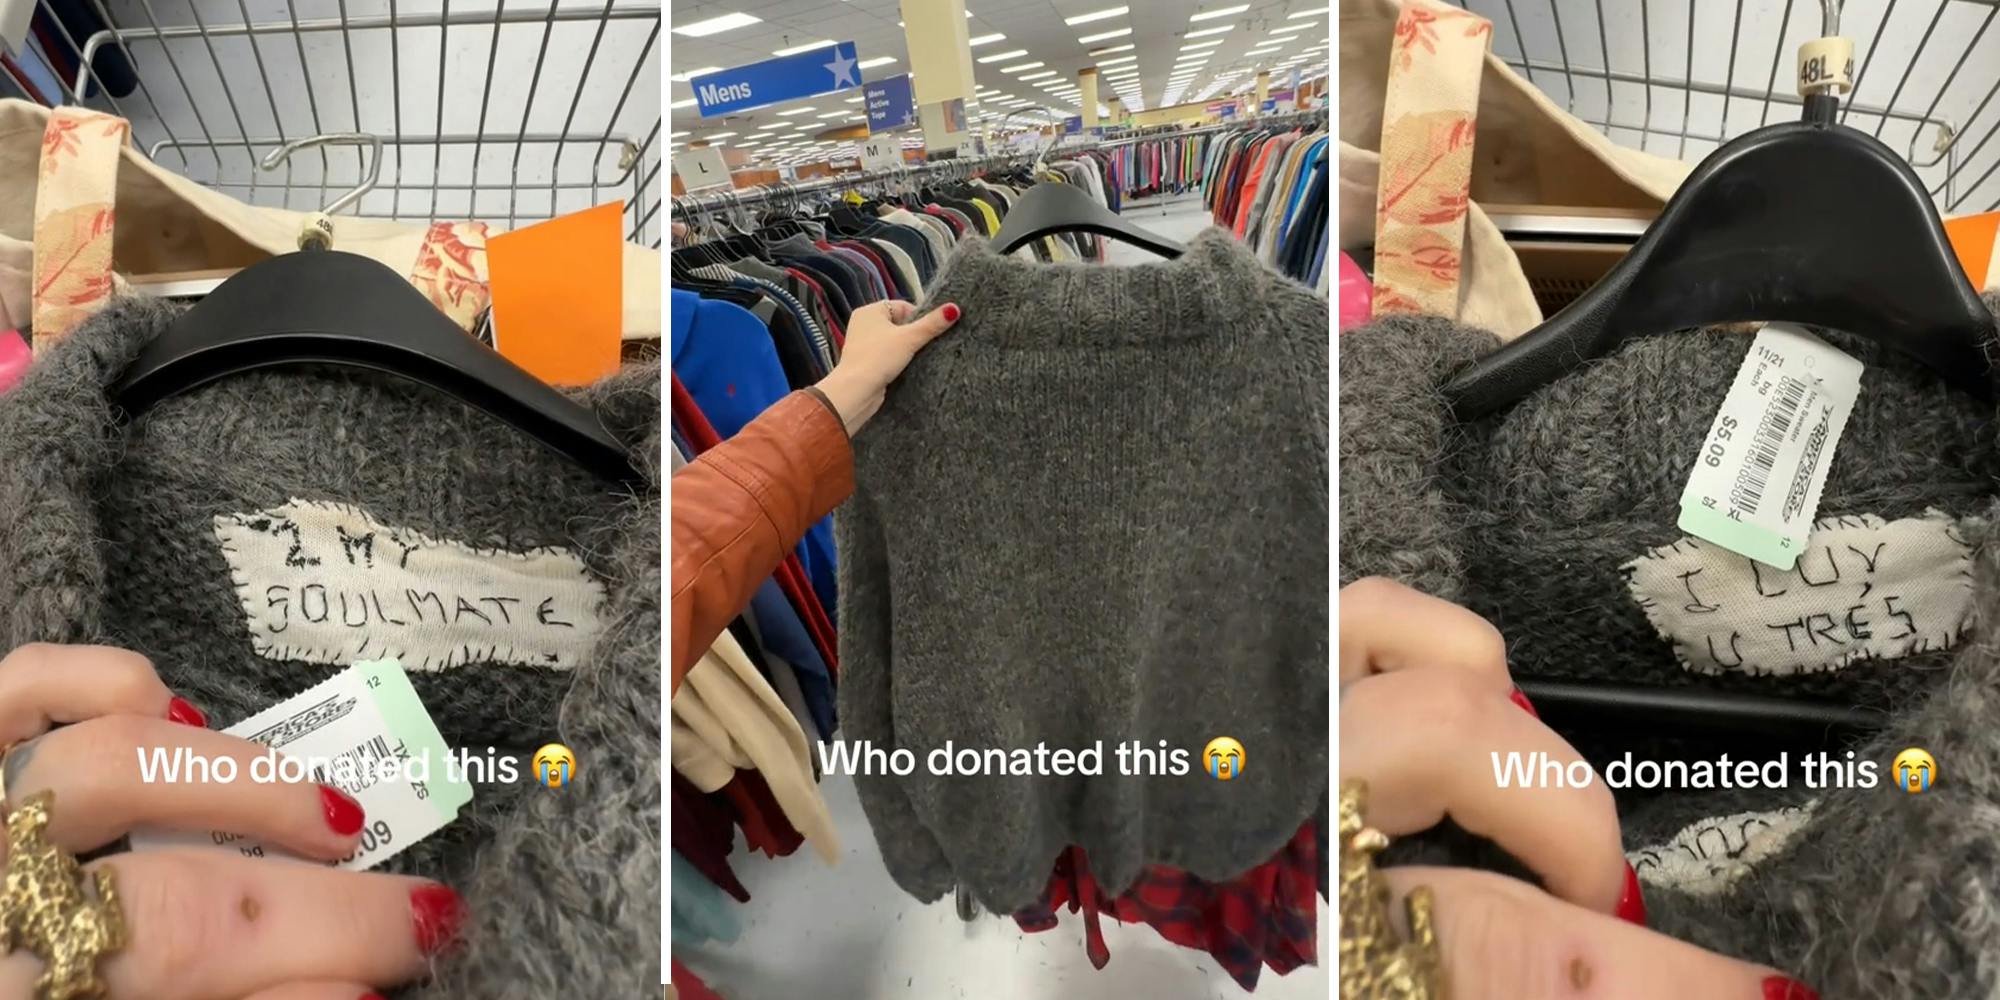 Woman finds sweater labeled '2 my soulmate' at thrift store